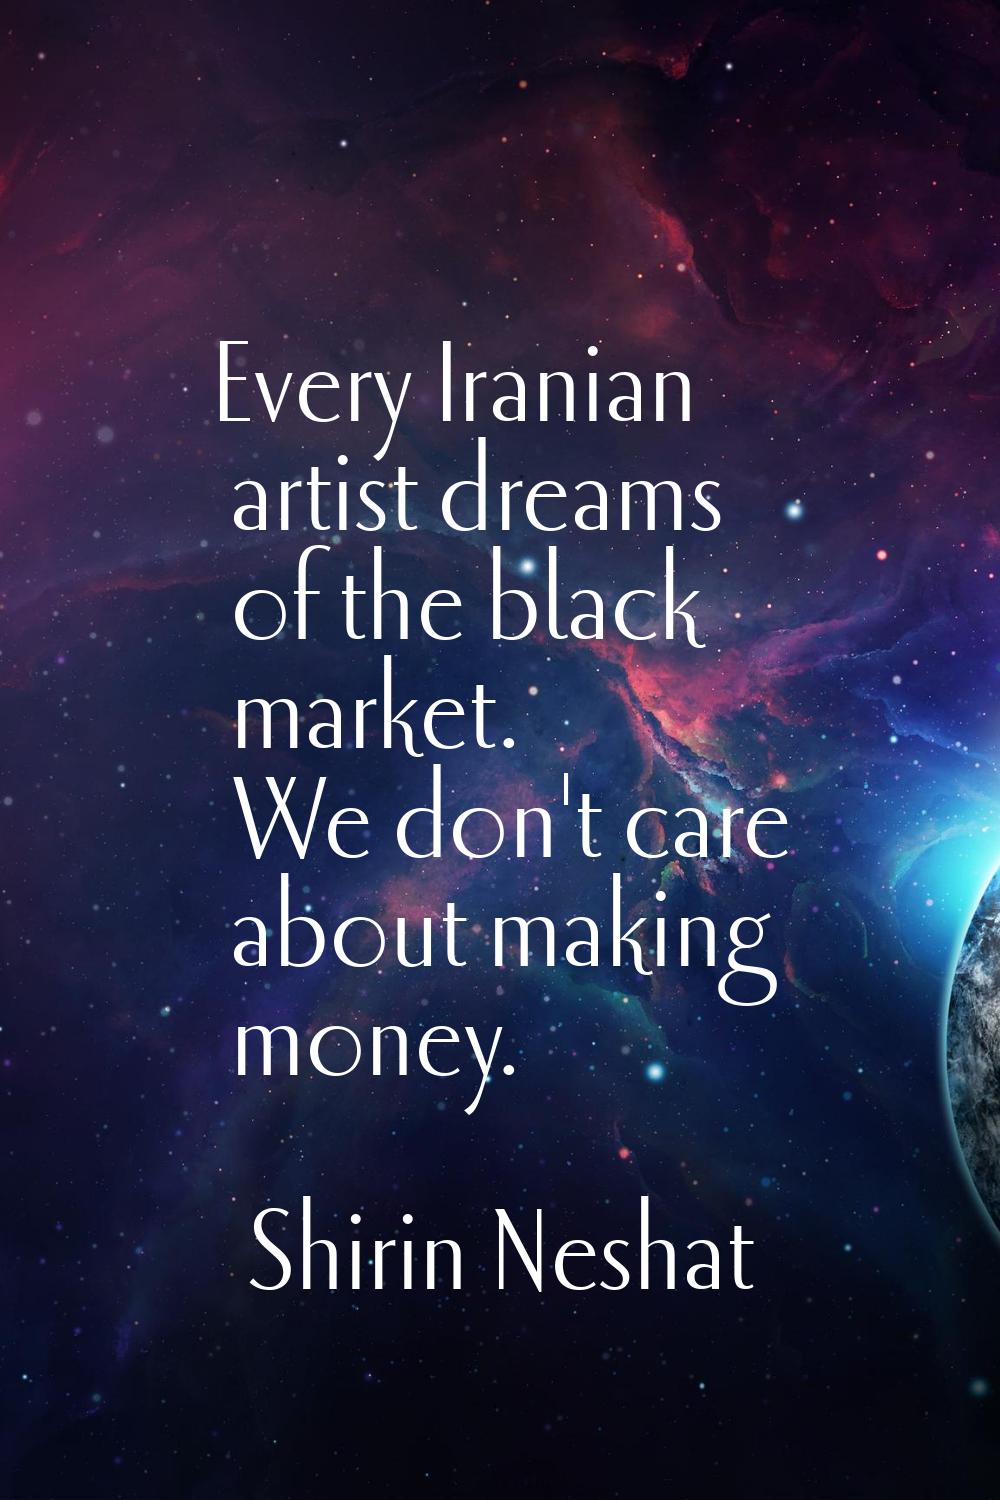 Every Iranian artist dreams of the black market. We don't care about making money.